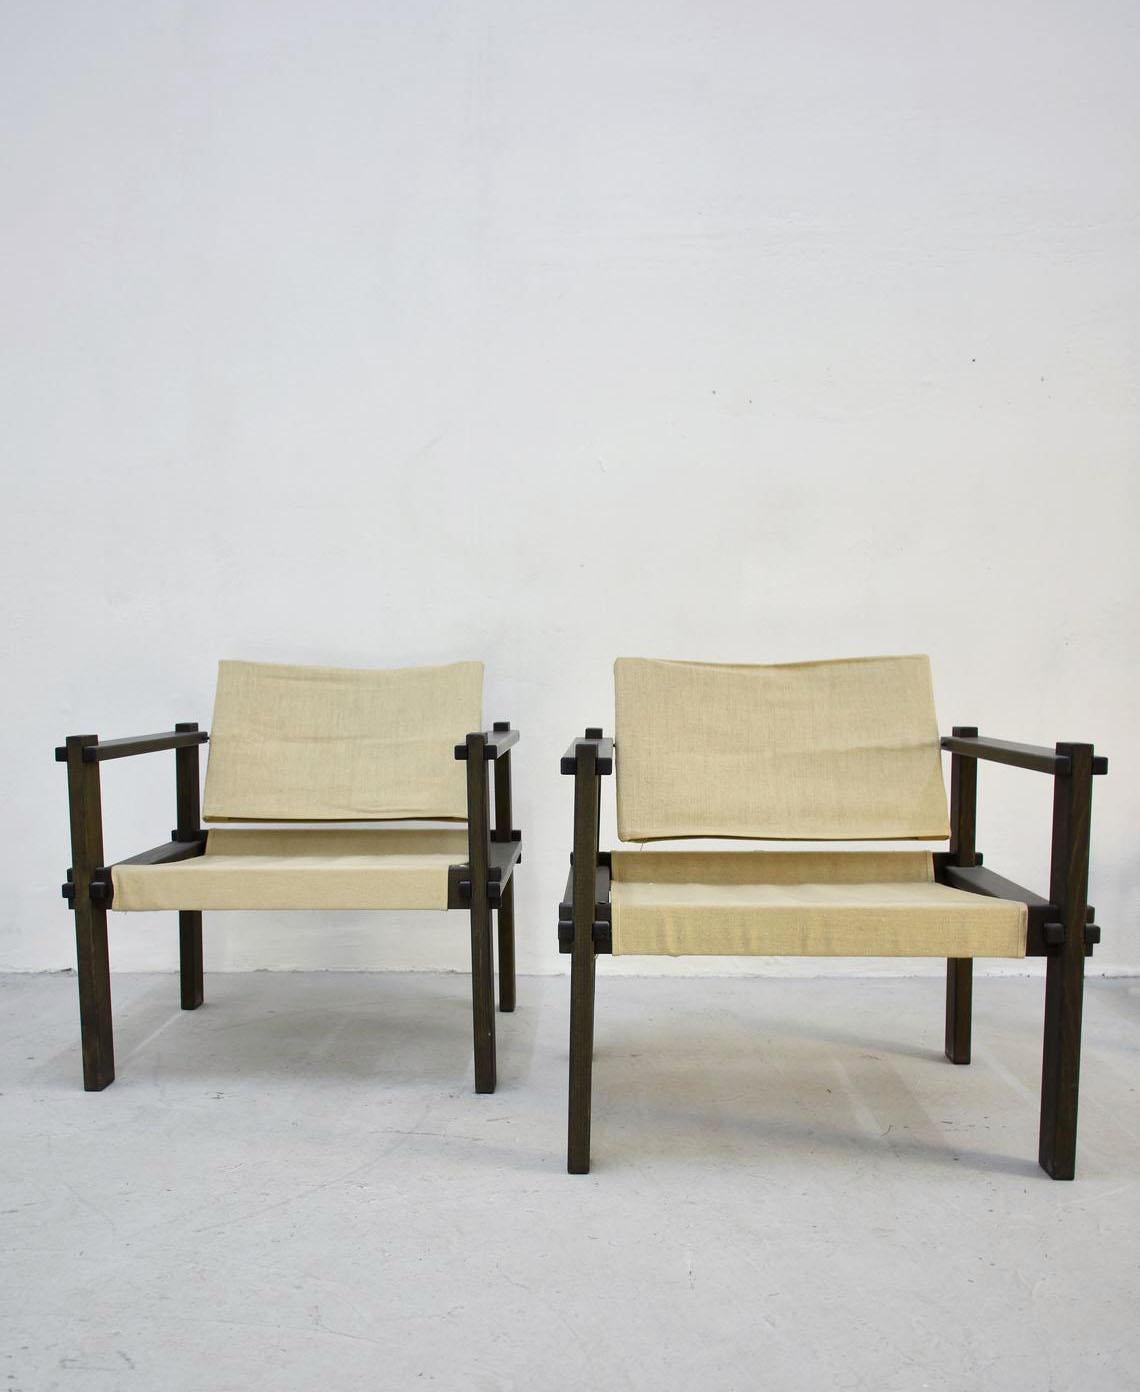 Set of two Farmer Safari chairs and a coffee table designed by Gerd Lange and Produced by Bofinger in 1965

The chairs feature a modernist stained beechwood frame with stretched linen seat and backrest. The backrest is adjustable.

The set is in